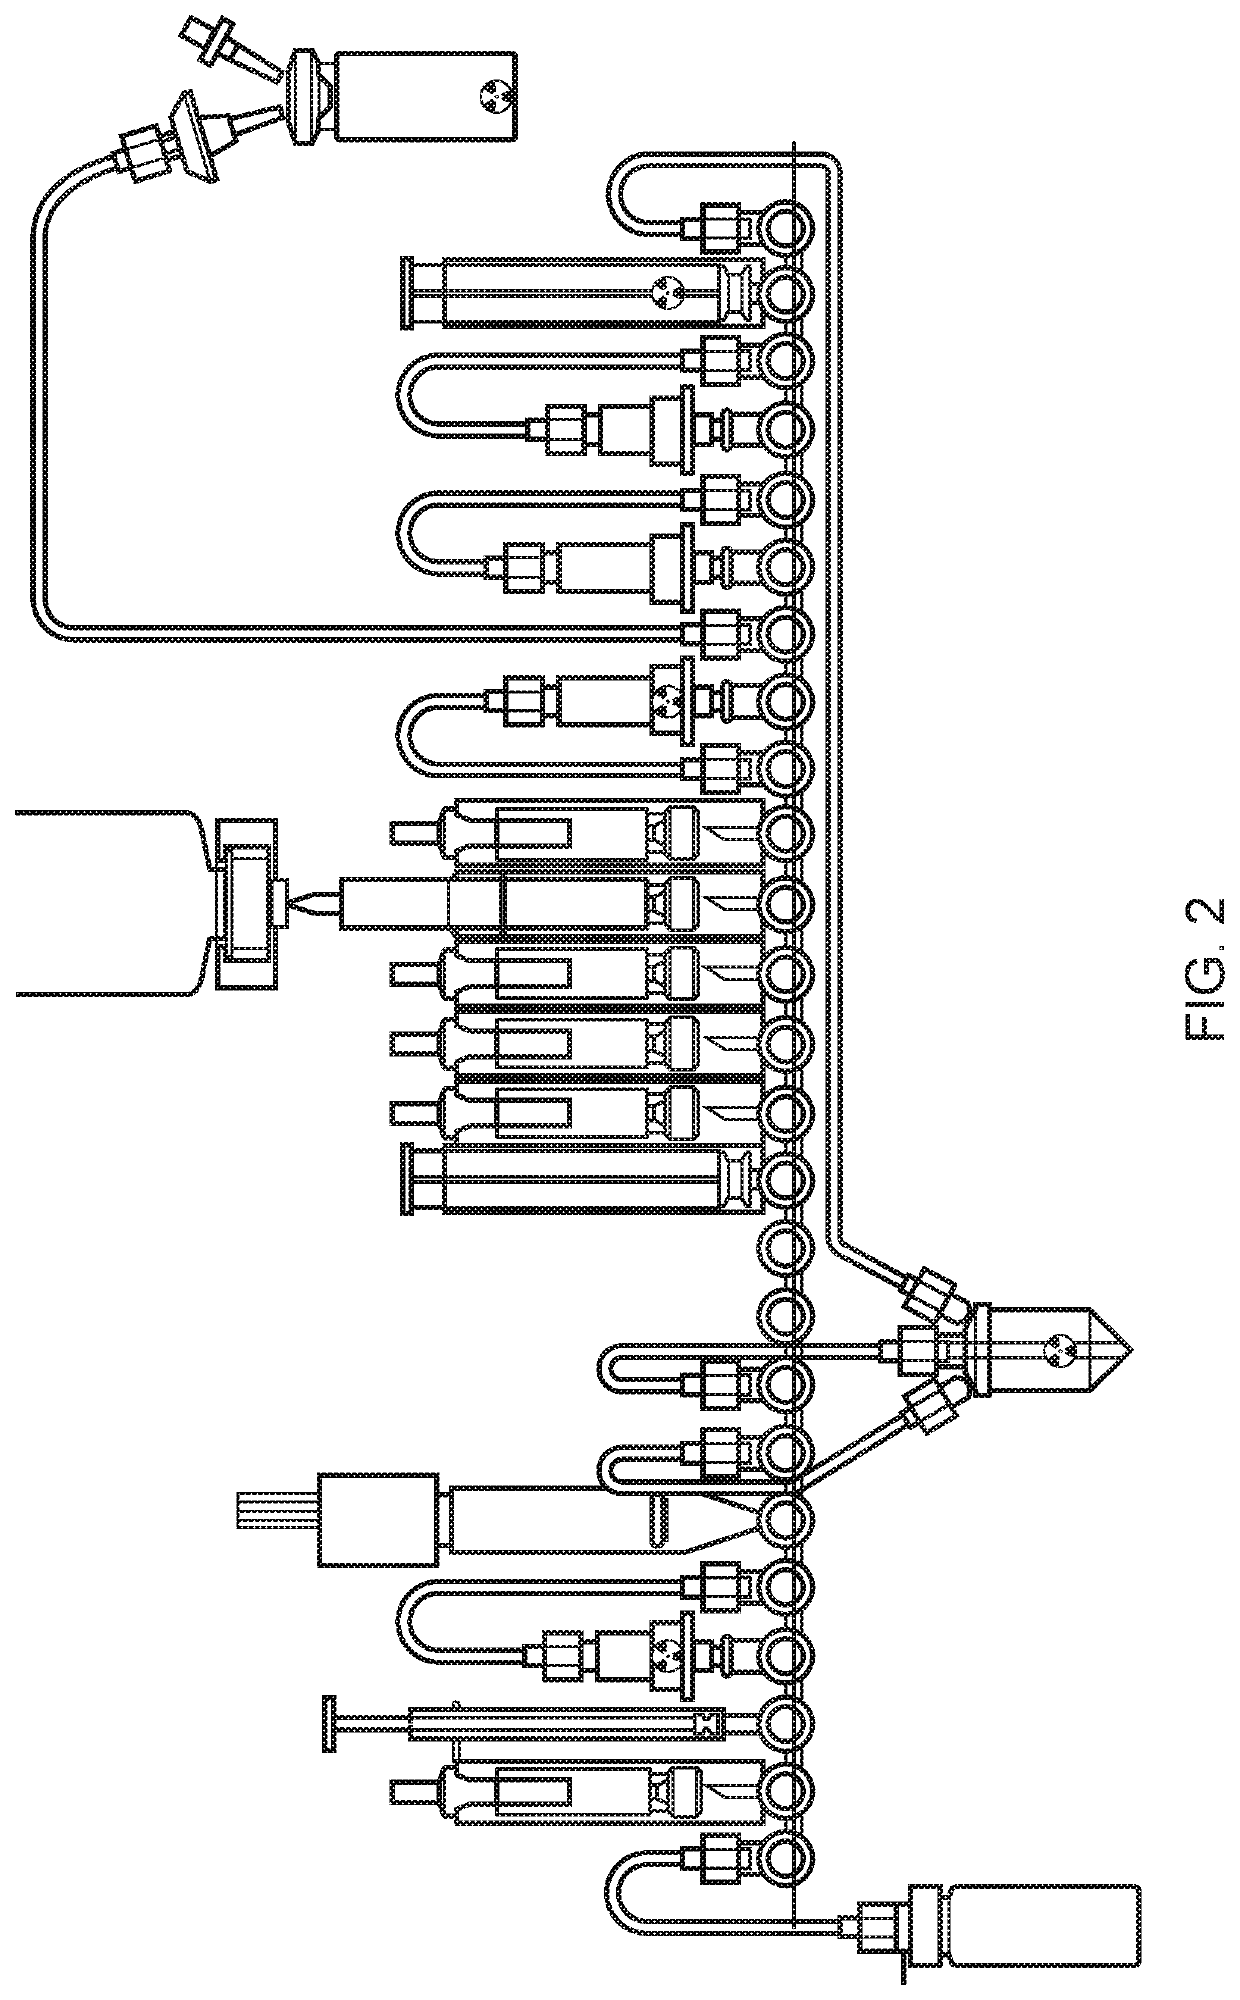 Dual run cassette for the synthesis of 18F-labelled compounds